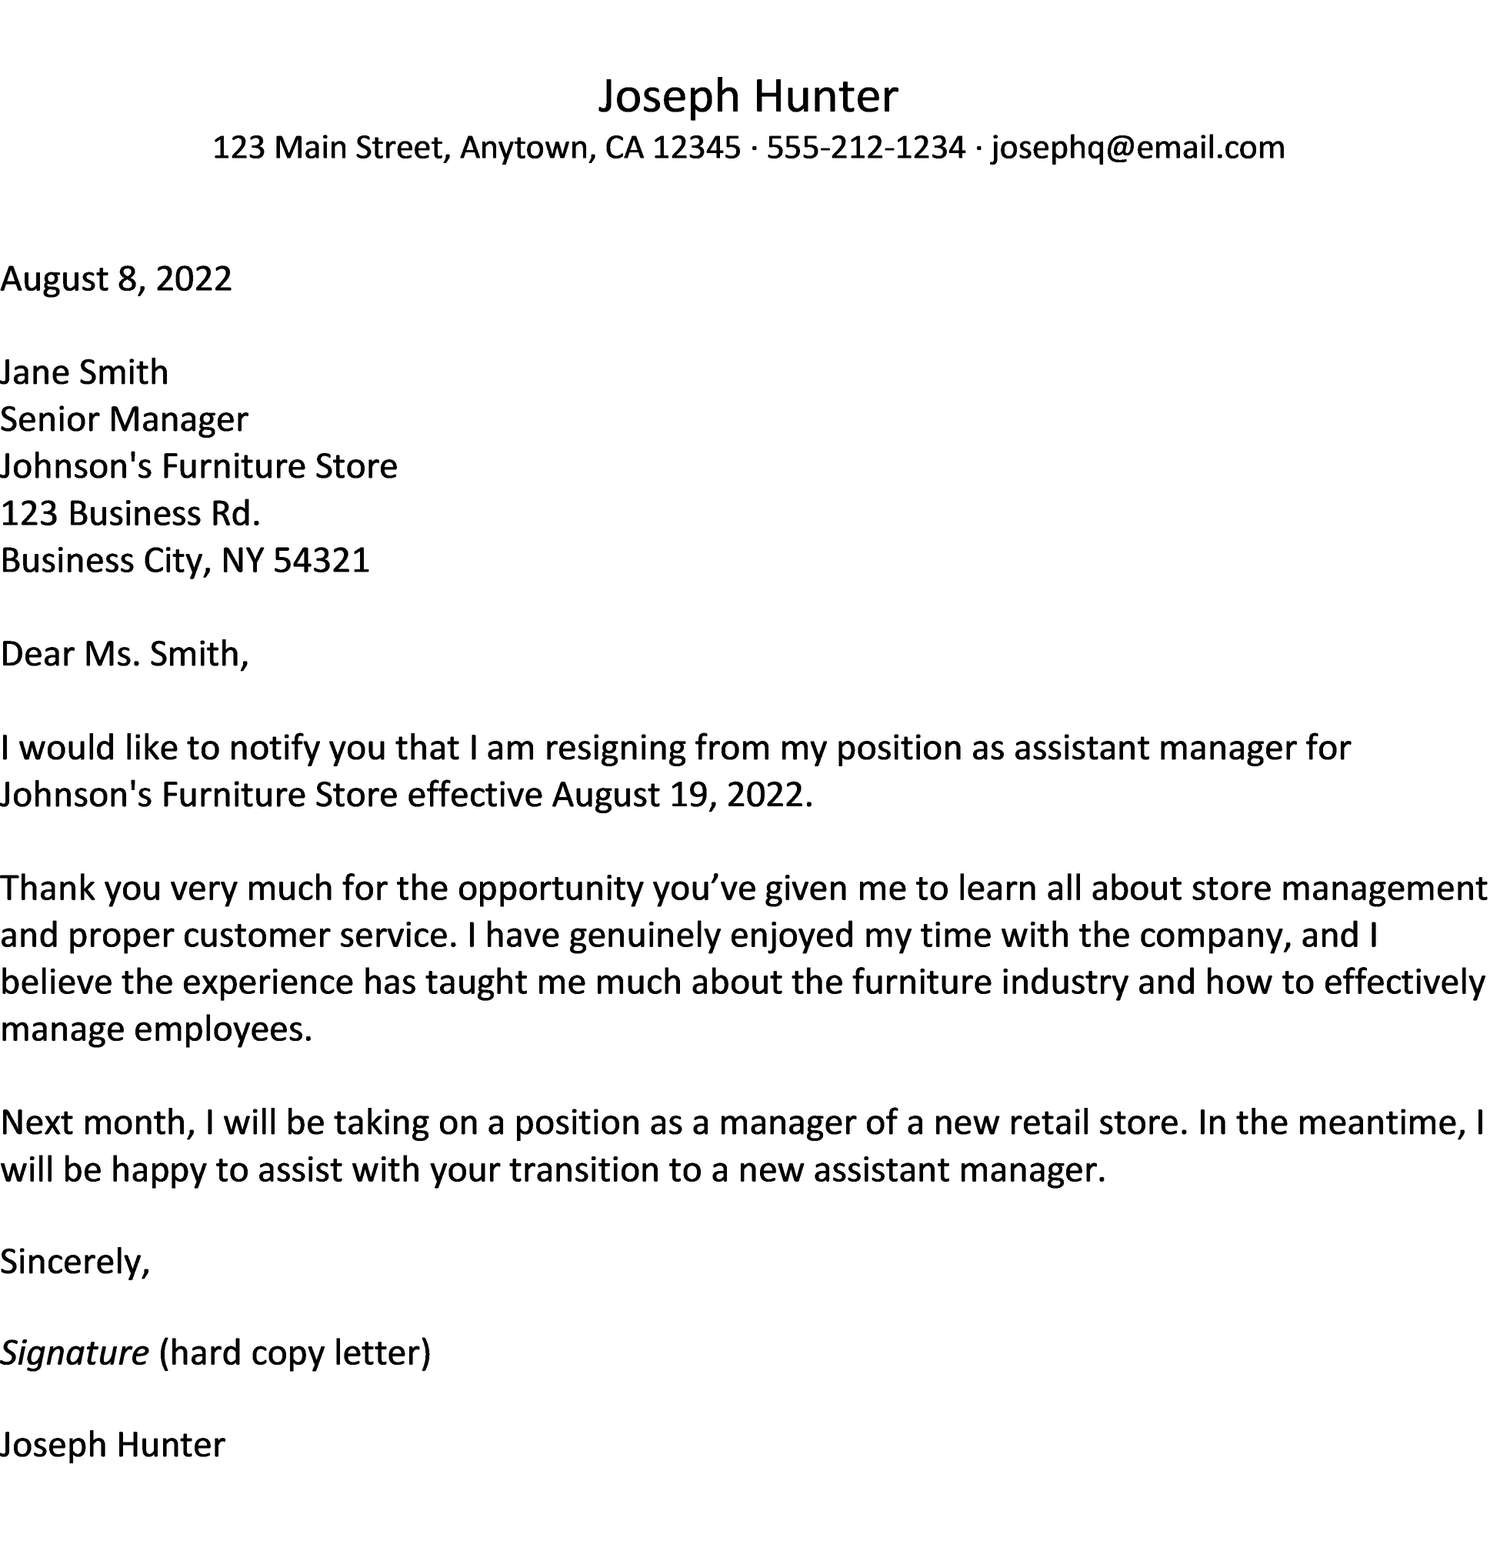 Sample Email to Send Resume to Referral How to Write A Resignation Letter (with Samples)